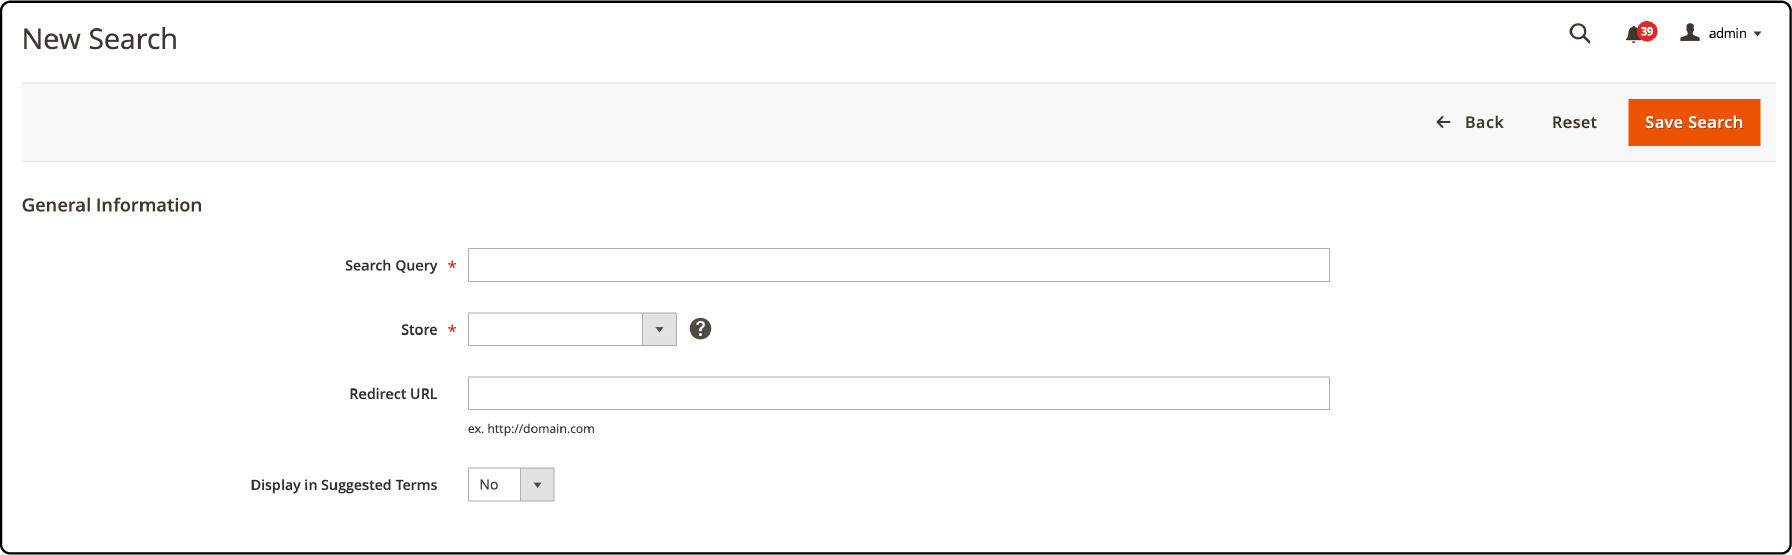 Screen for inputting a new search term in Magento 2